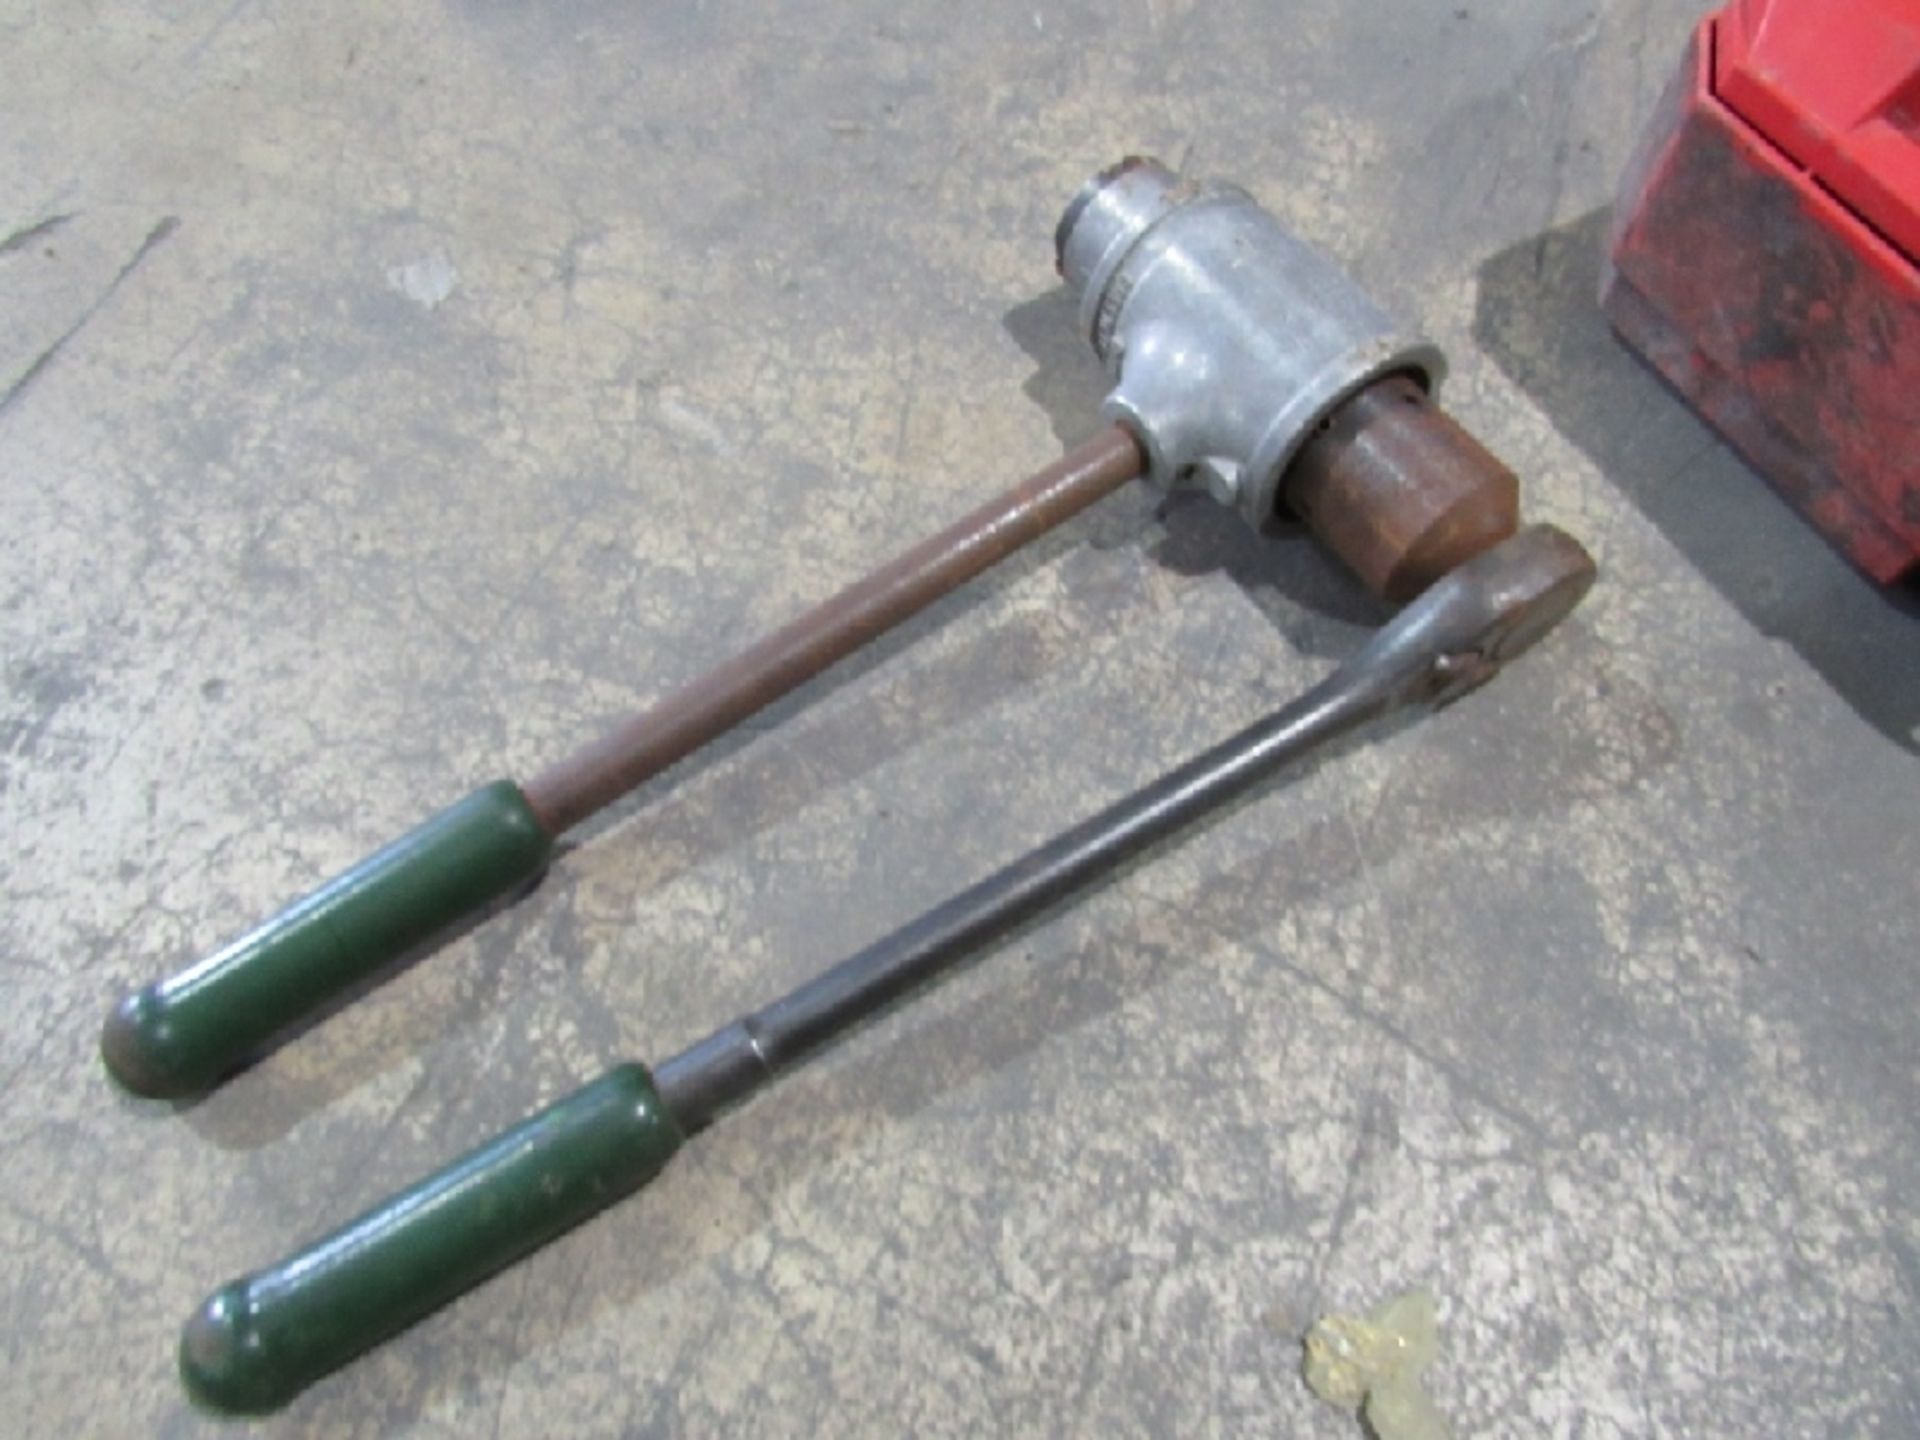 Greenlee Ratchet Knockout Tool- ***Located in Chattanooga, TN*** MFR - Greenlee Model - Unknown 3/ - Image 4 of 6